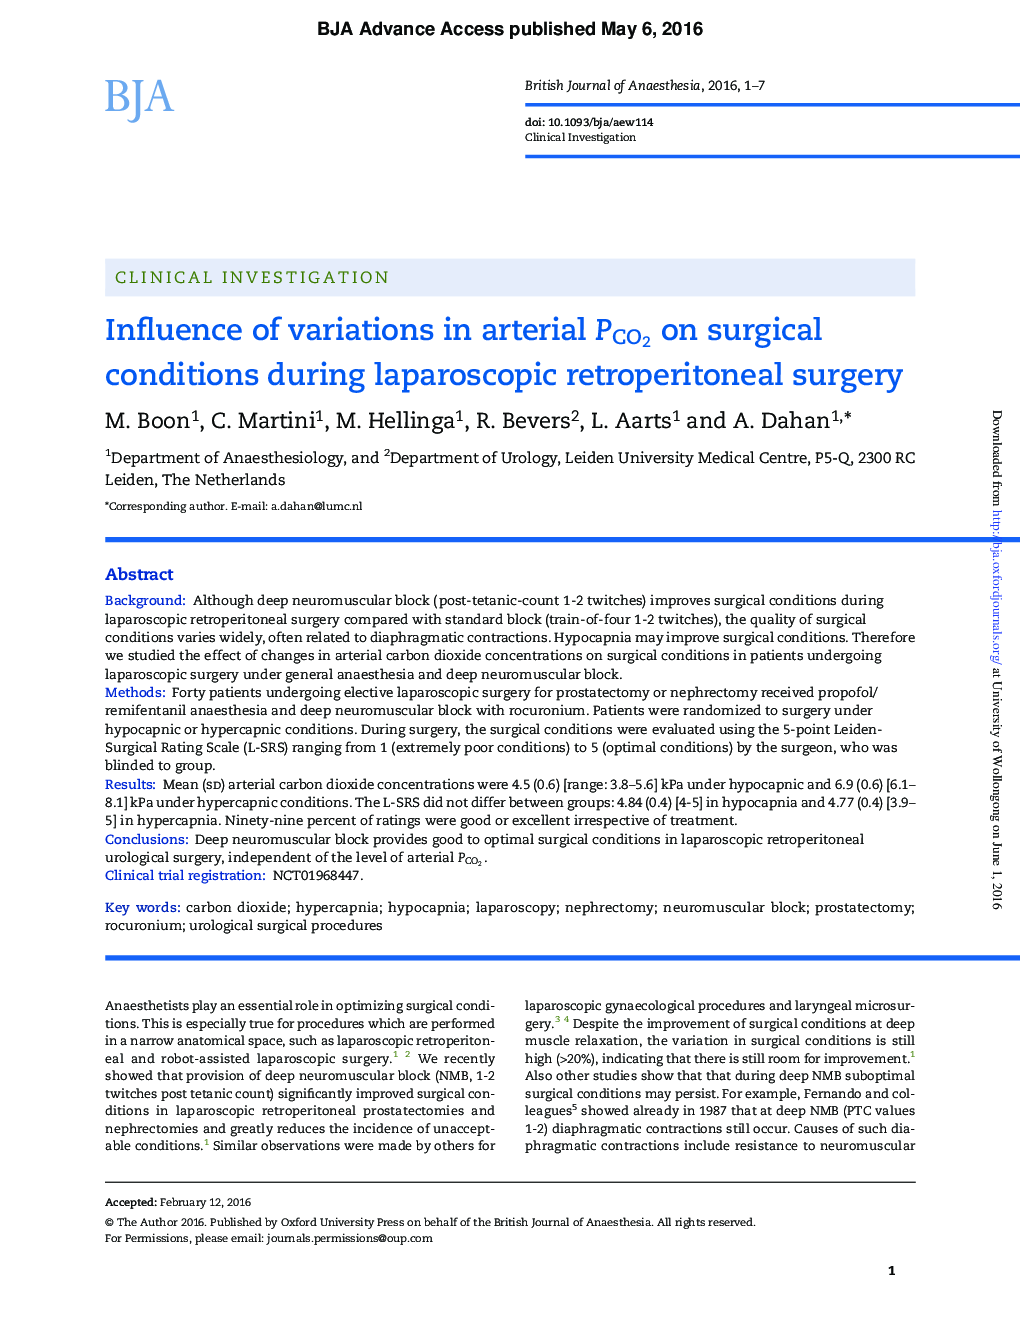 Influence of variations in arterial PCO2 on surgical conditions during laparoscopic retroperitoneal surgery